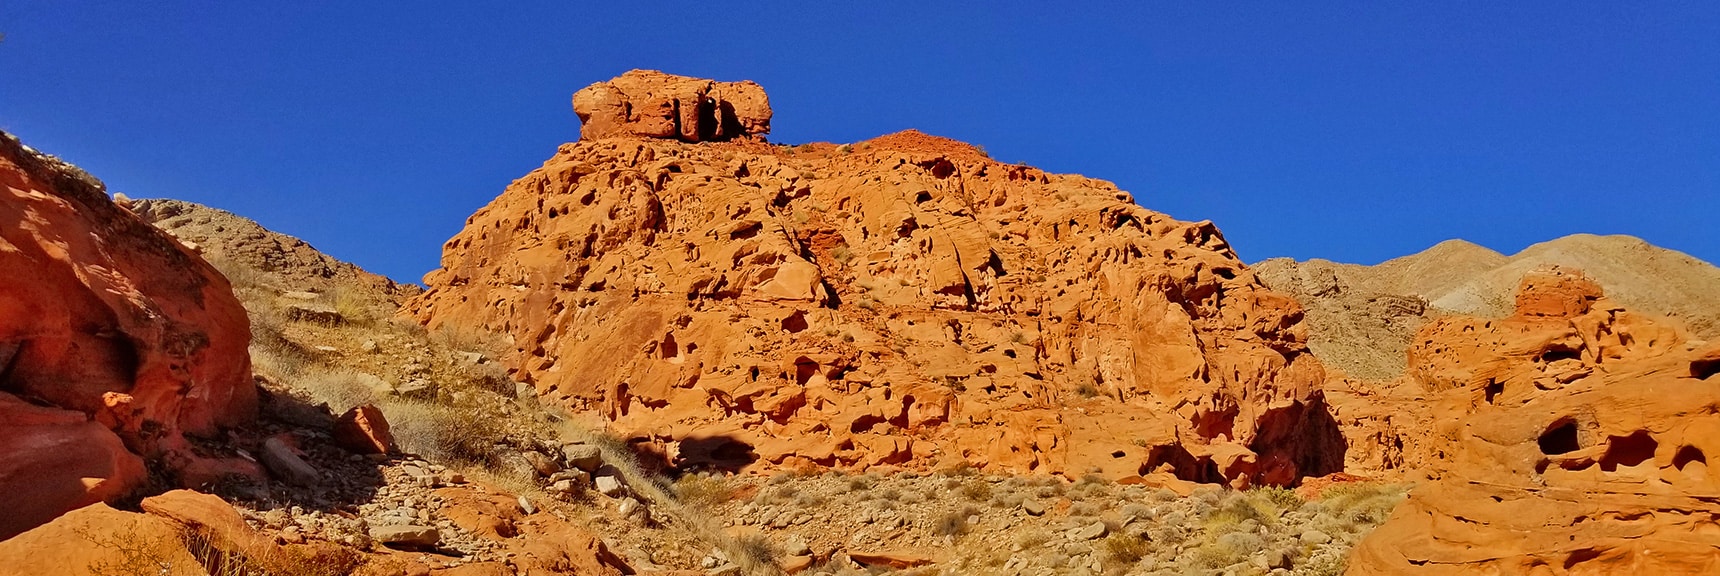 Huge Mound of Jurassic Era Aztec Red Rock | Bowl of Fire, Lake Mead National Recreation Area, Nevada